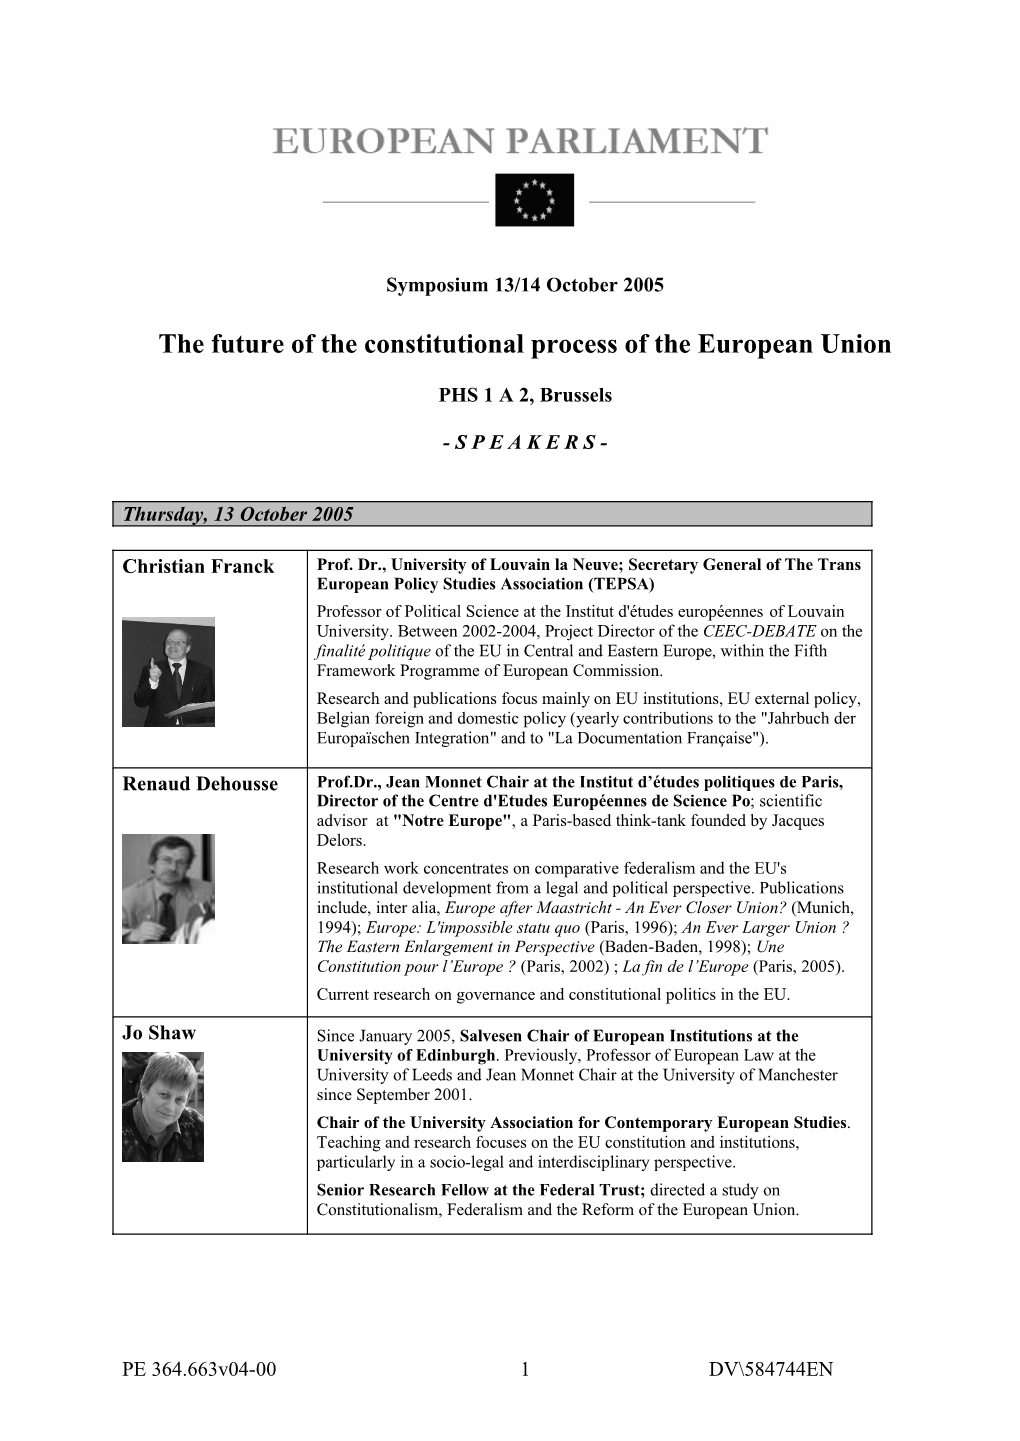 The Future of the Constitutional Process of the European Union